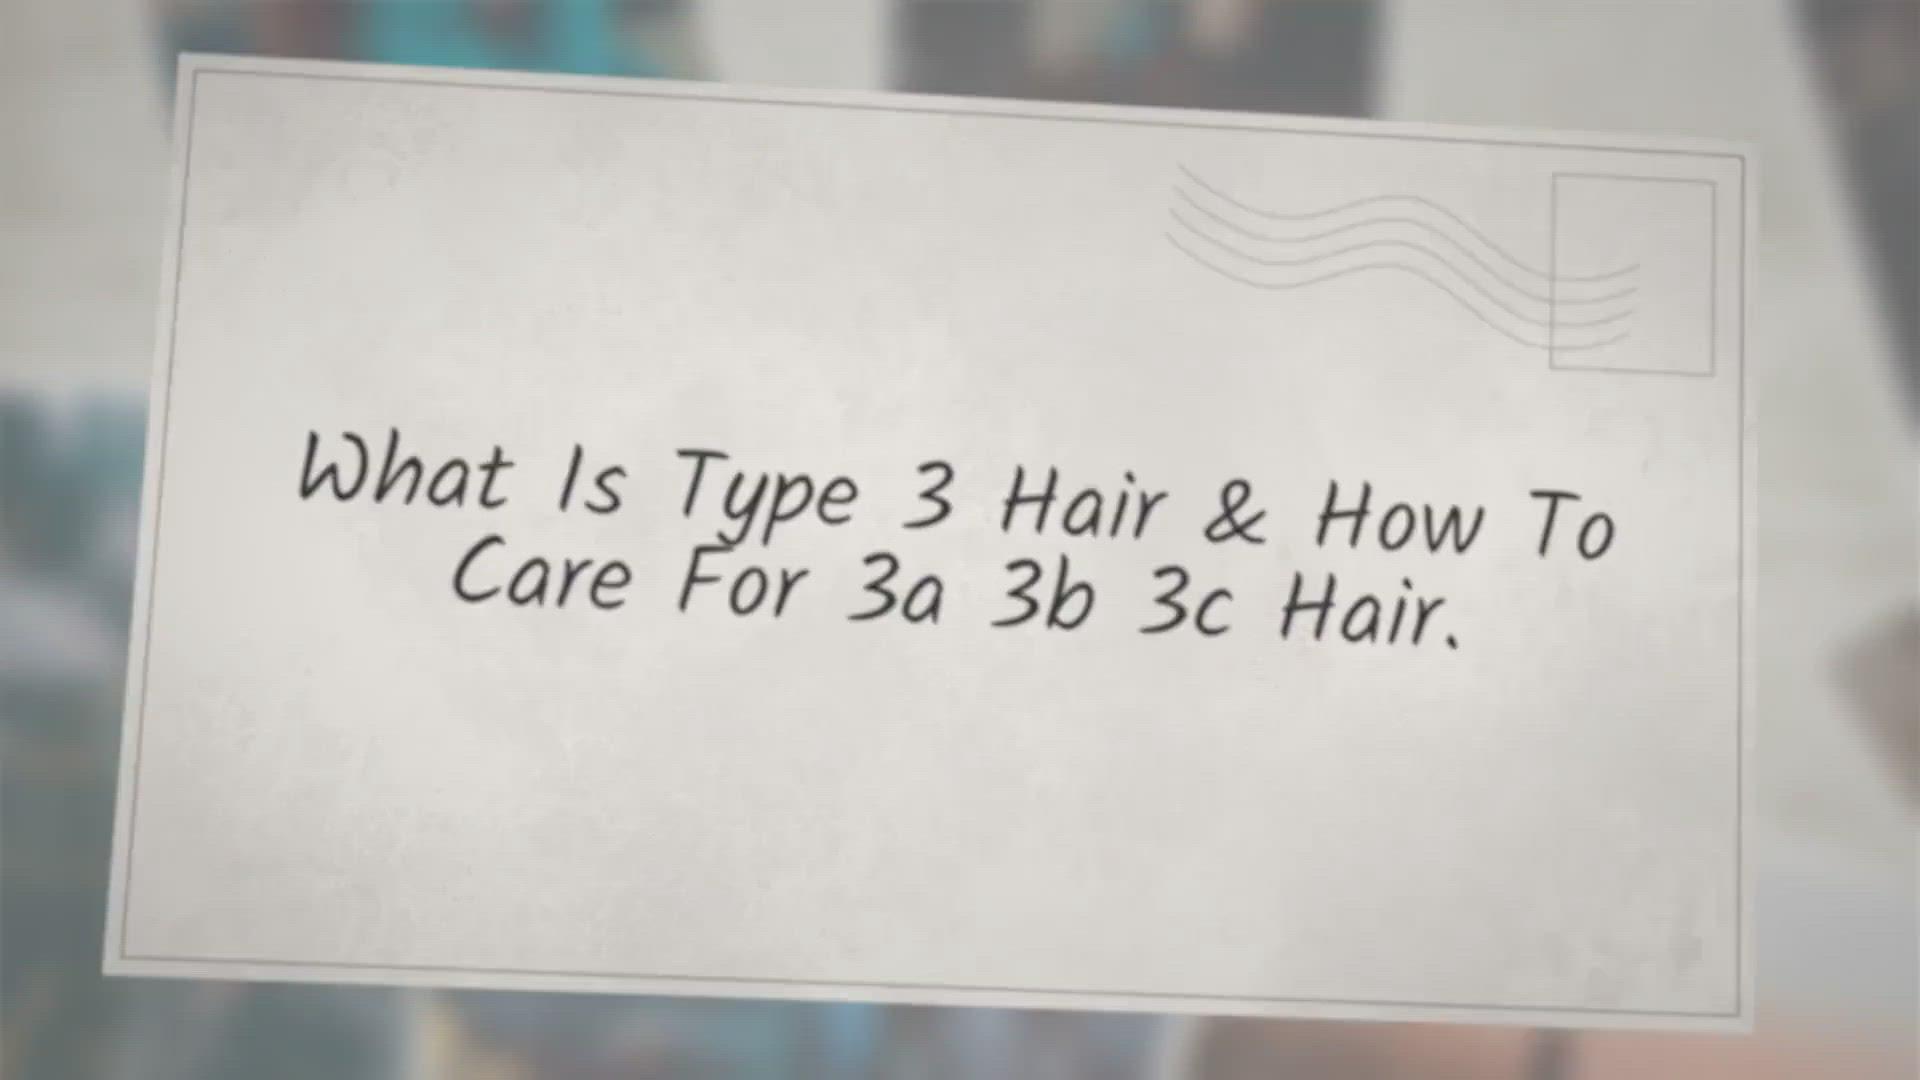 'Video thumbnail for What Is Type 3 Hair & How To Care For 3a 3b 3c Hair'